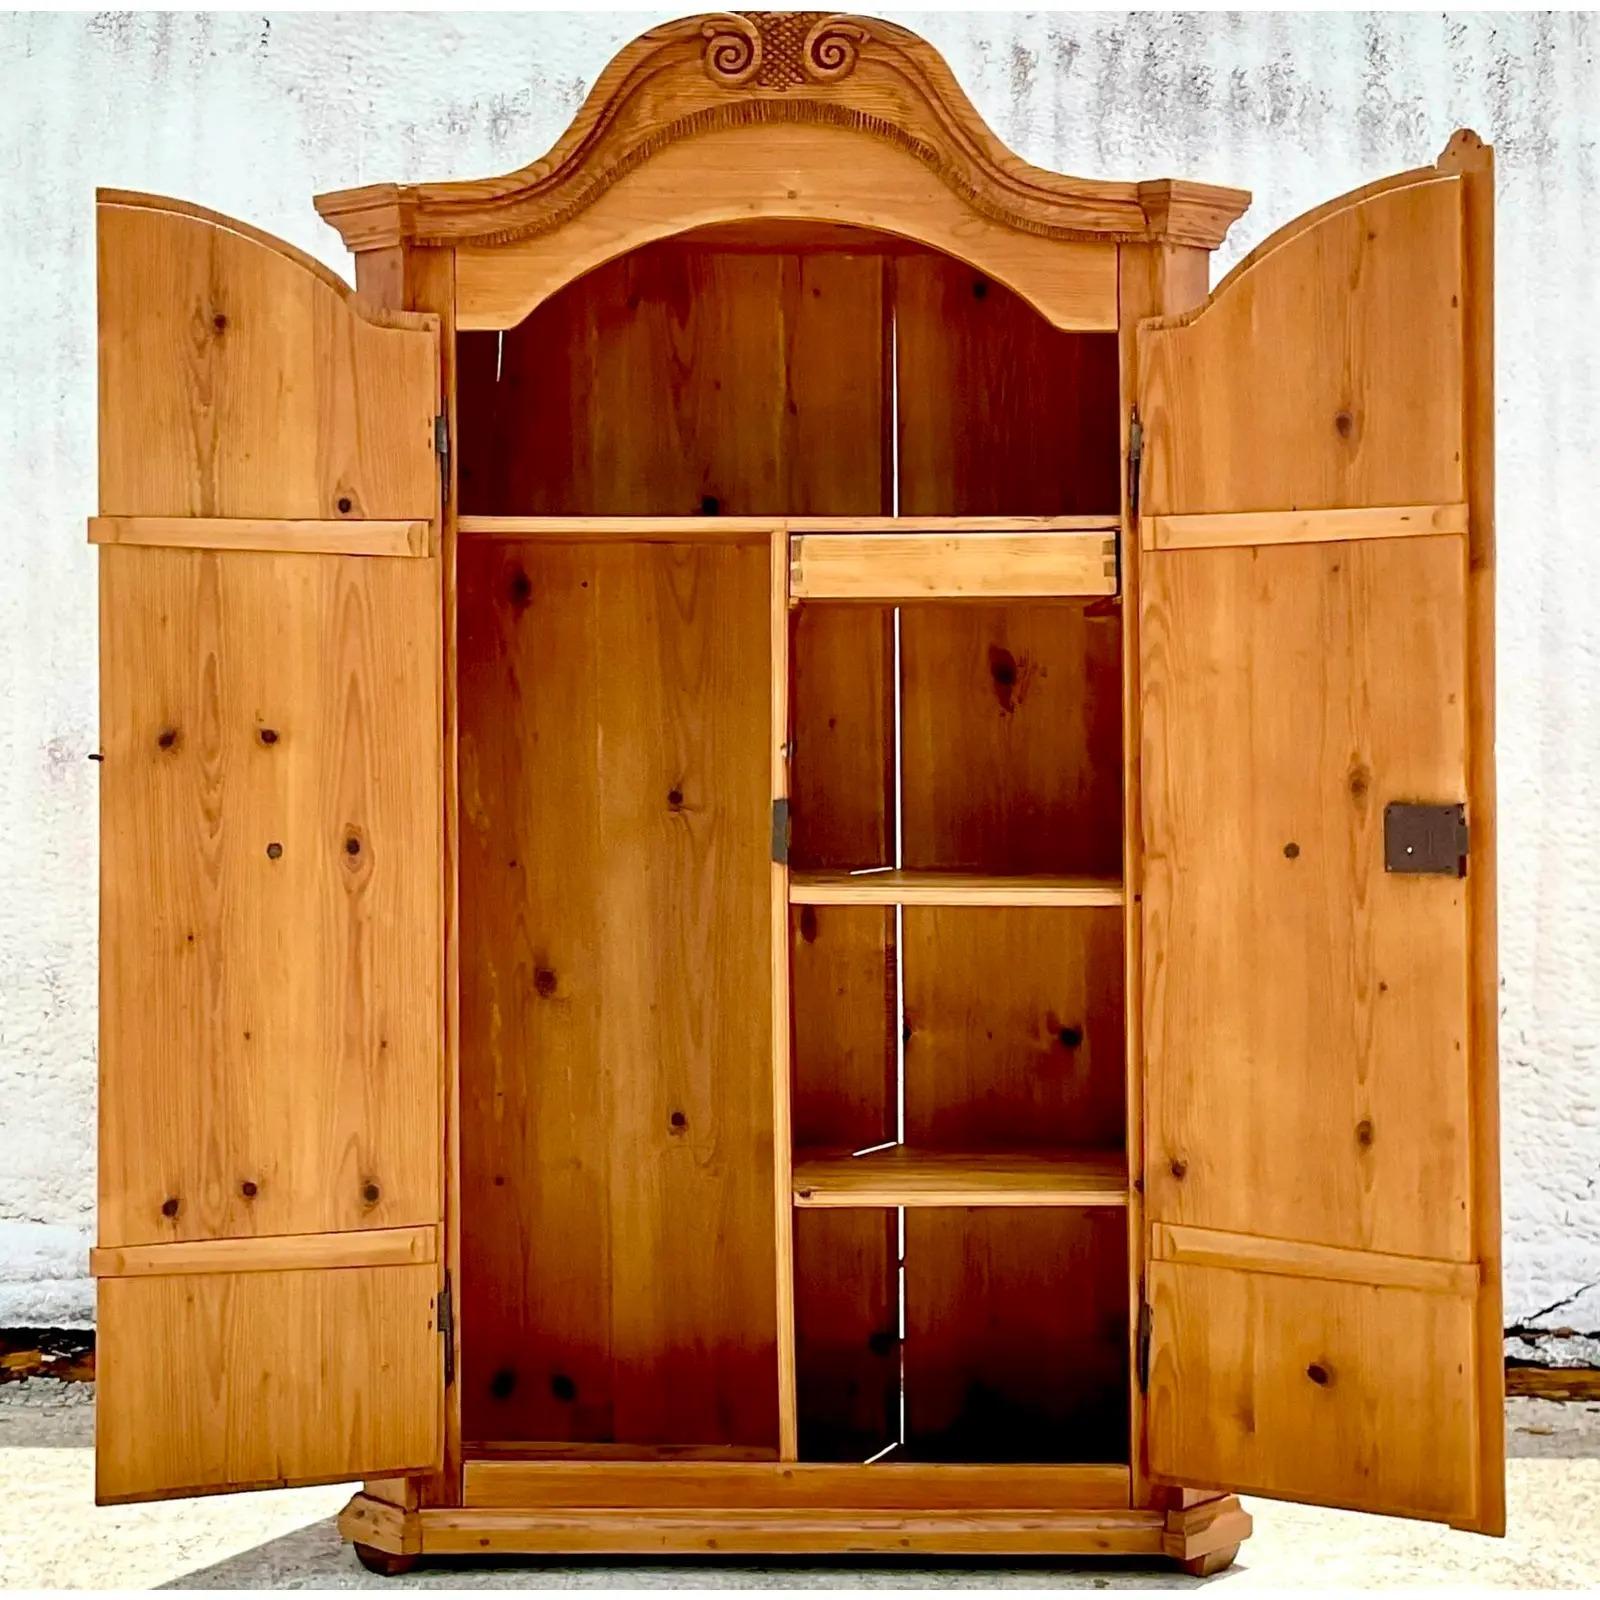 A fabulous vintage Rustic pine armoire. Beautiful hand carved detail on front. A high arched top with additional carvings. Beautifully laid out interior with areas for hanging and shelving. Acquired from a Palm Beach estate.